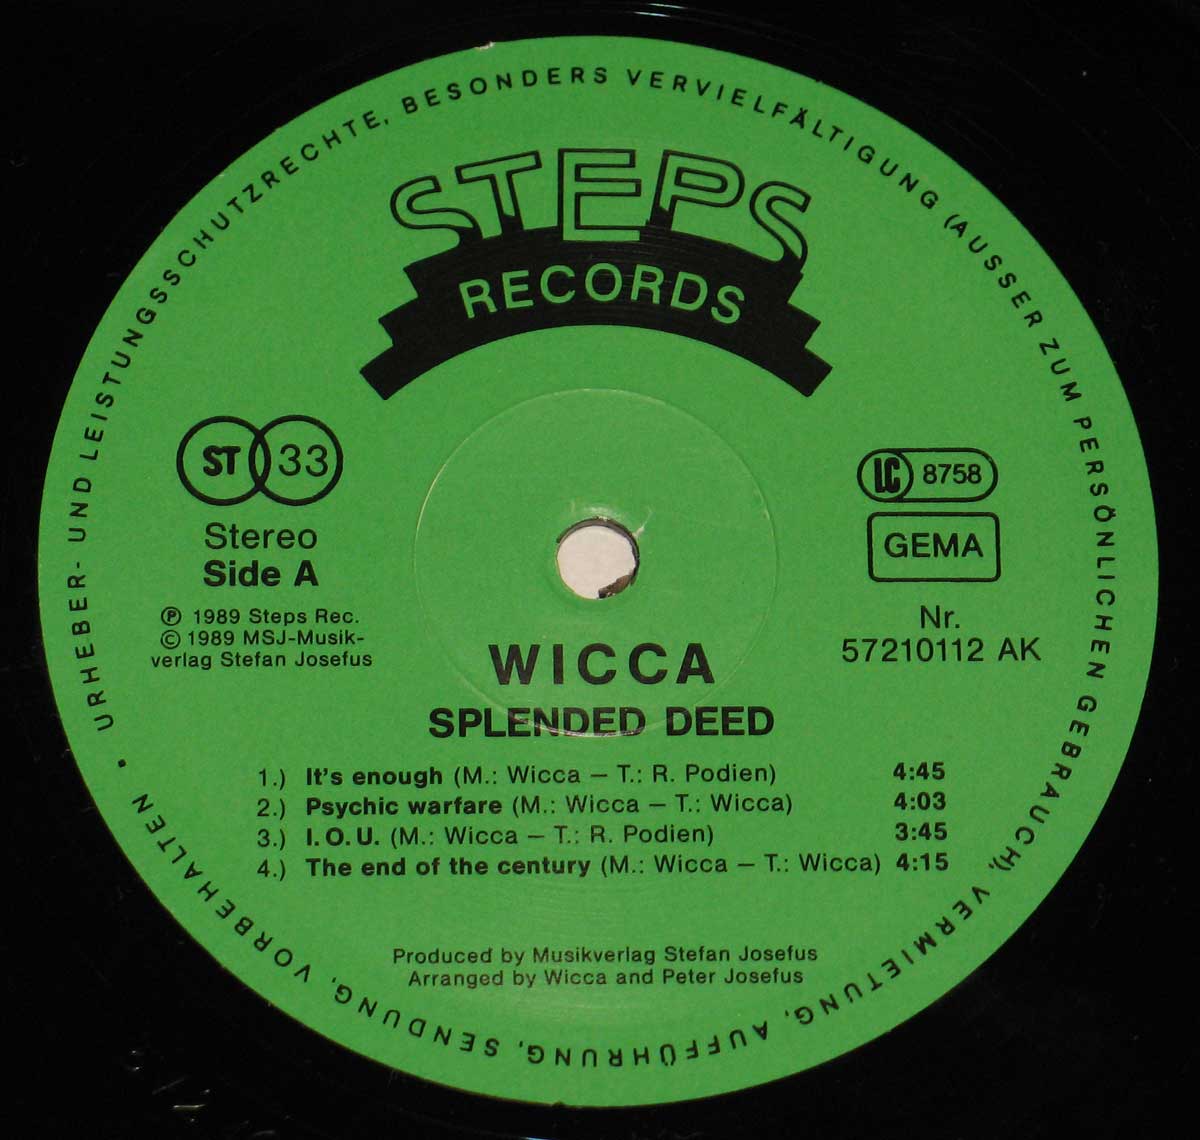 Close-up Photo of "WICCA - Splended Deed" "STPES Records" Record Label  